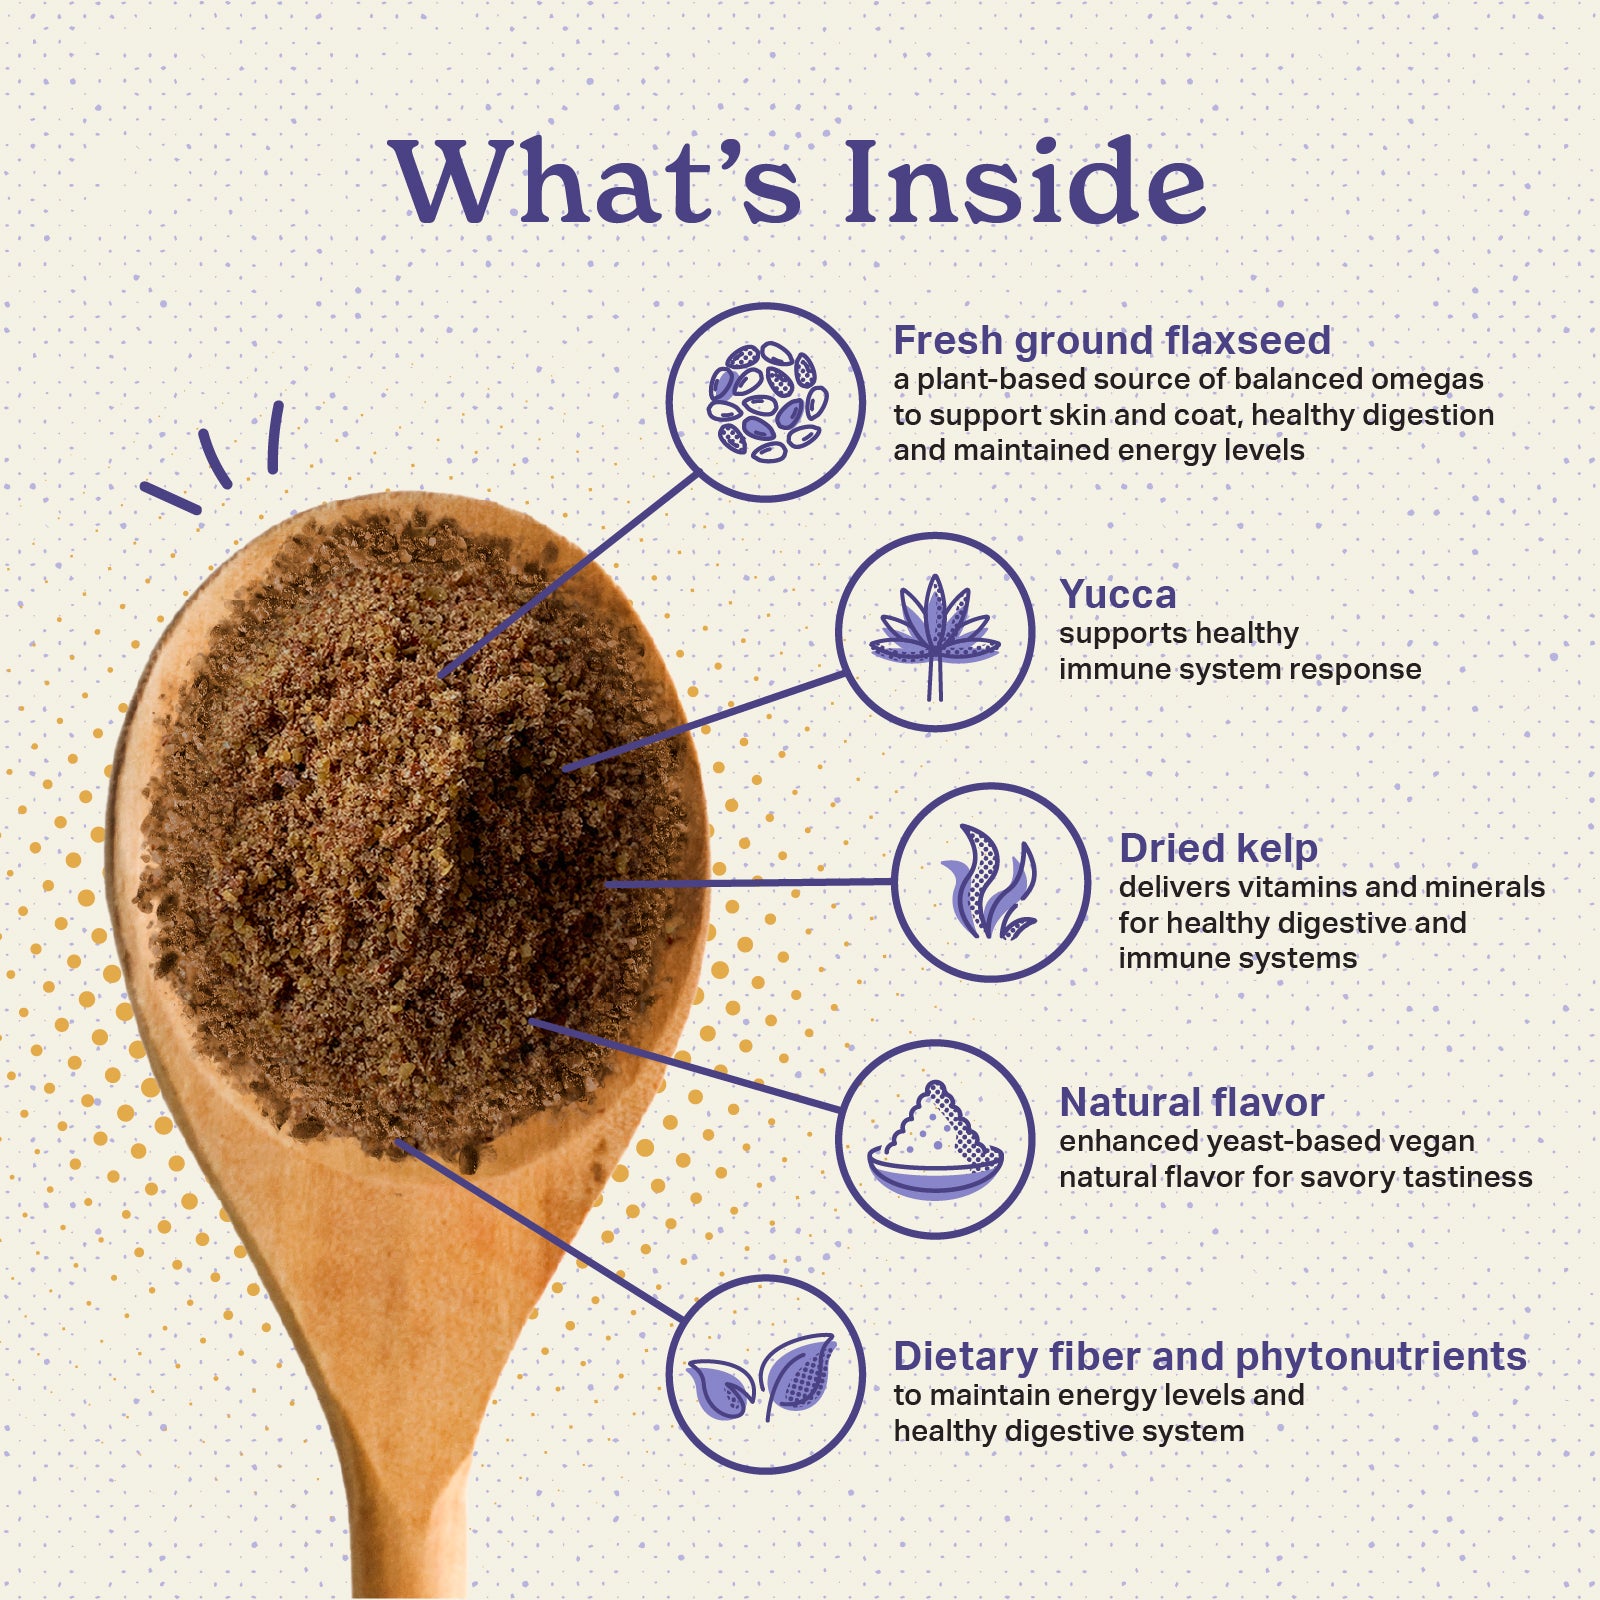 What's inside our Missing Link Superfood Powders Feline Wellbeing?  Fresh ground flaxseed, Yucca, Dried Kelp, Natural flavor, Dietary fiber and phytonutrients.